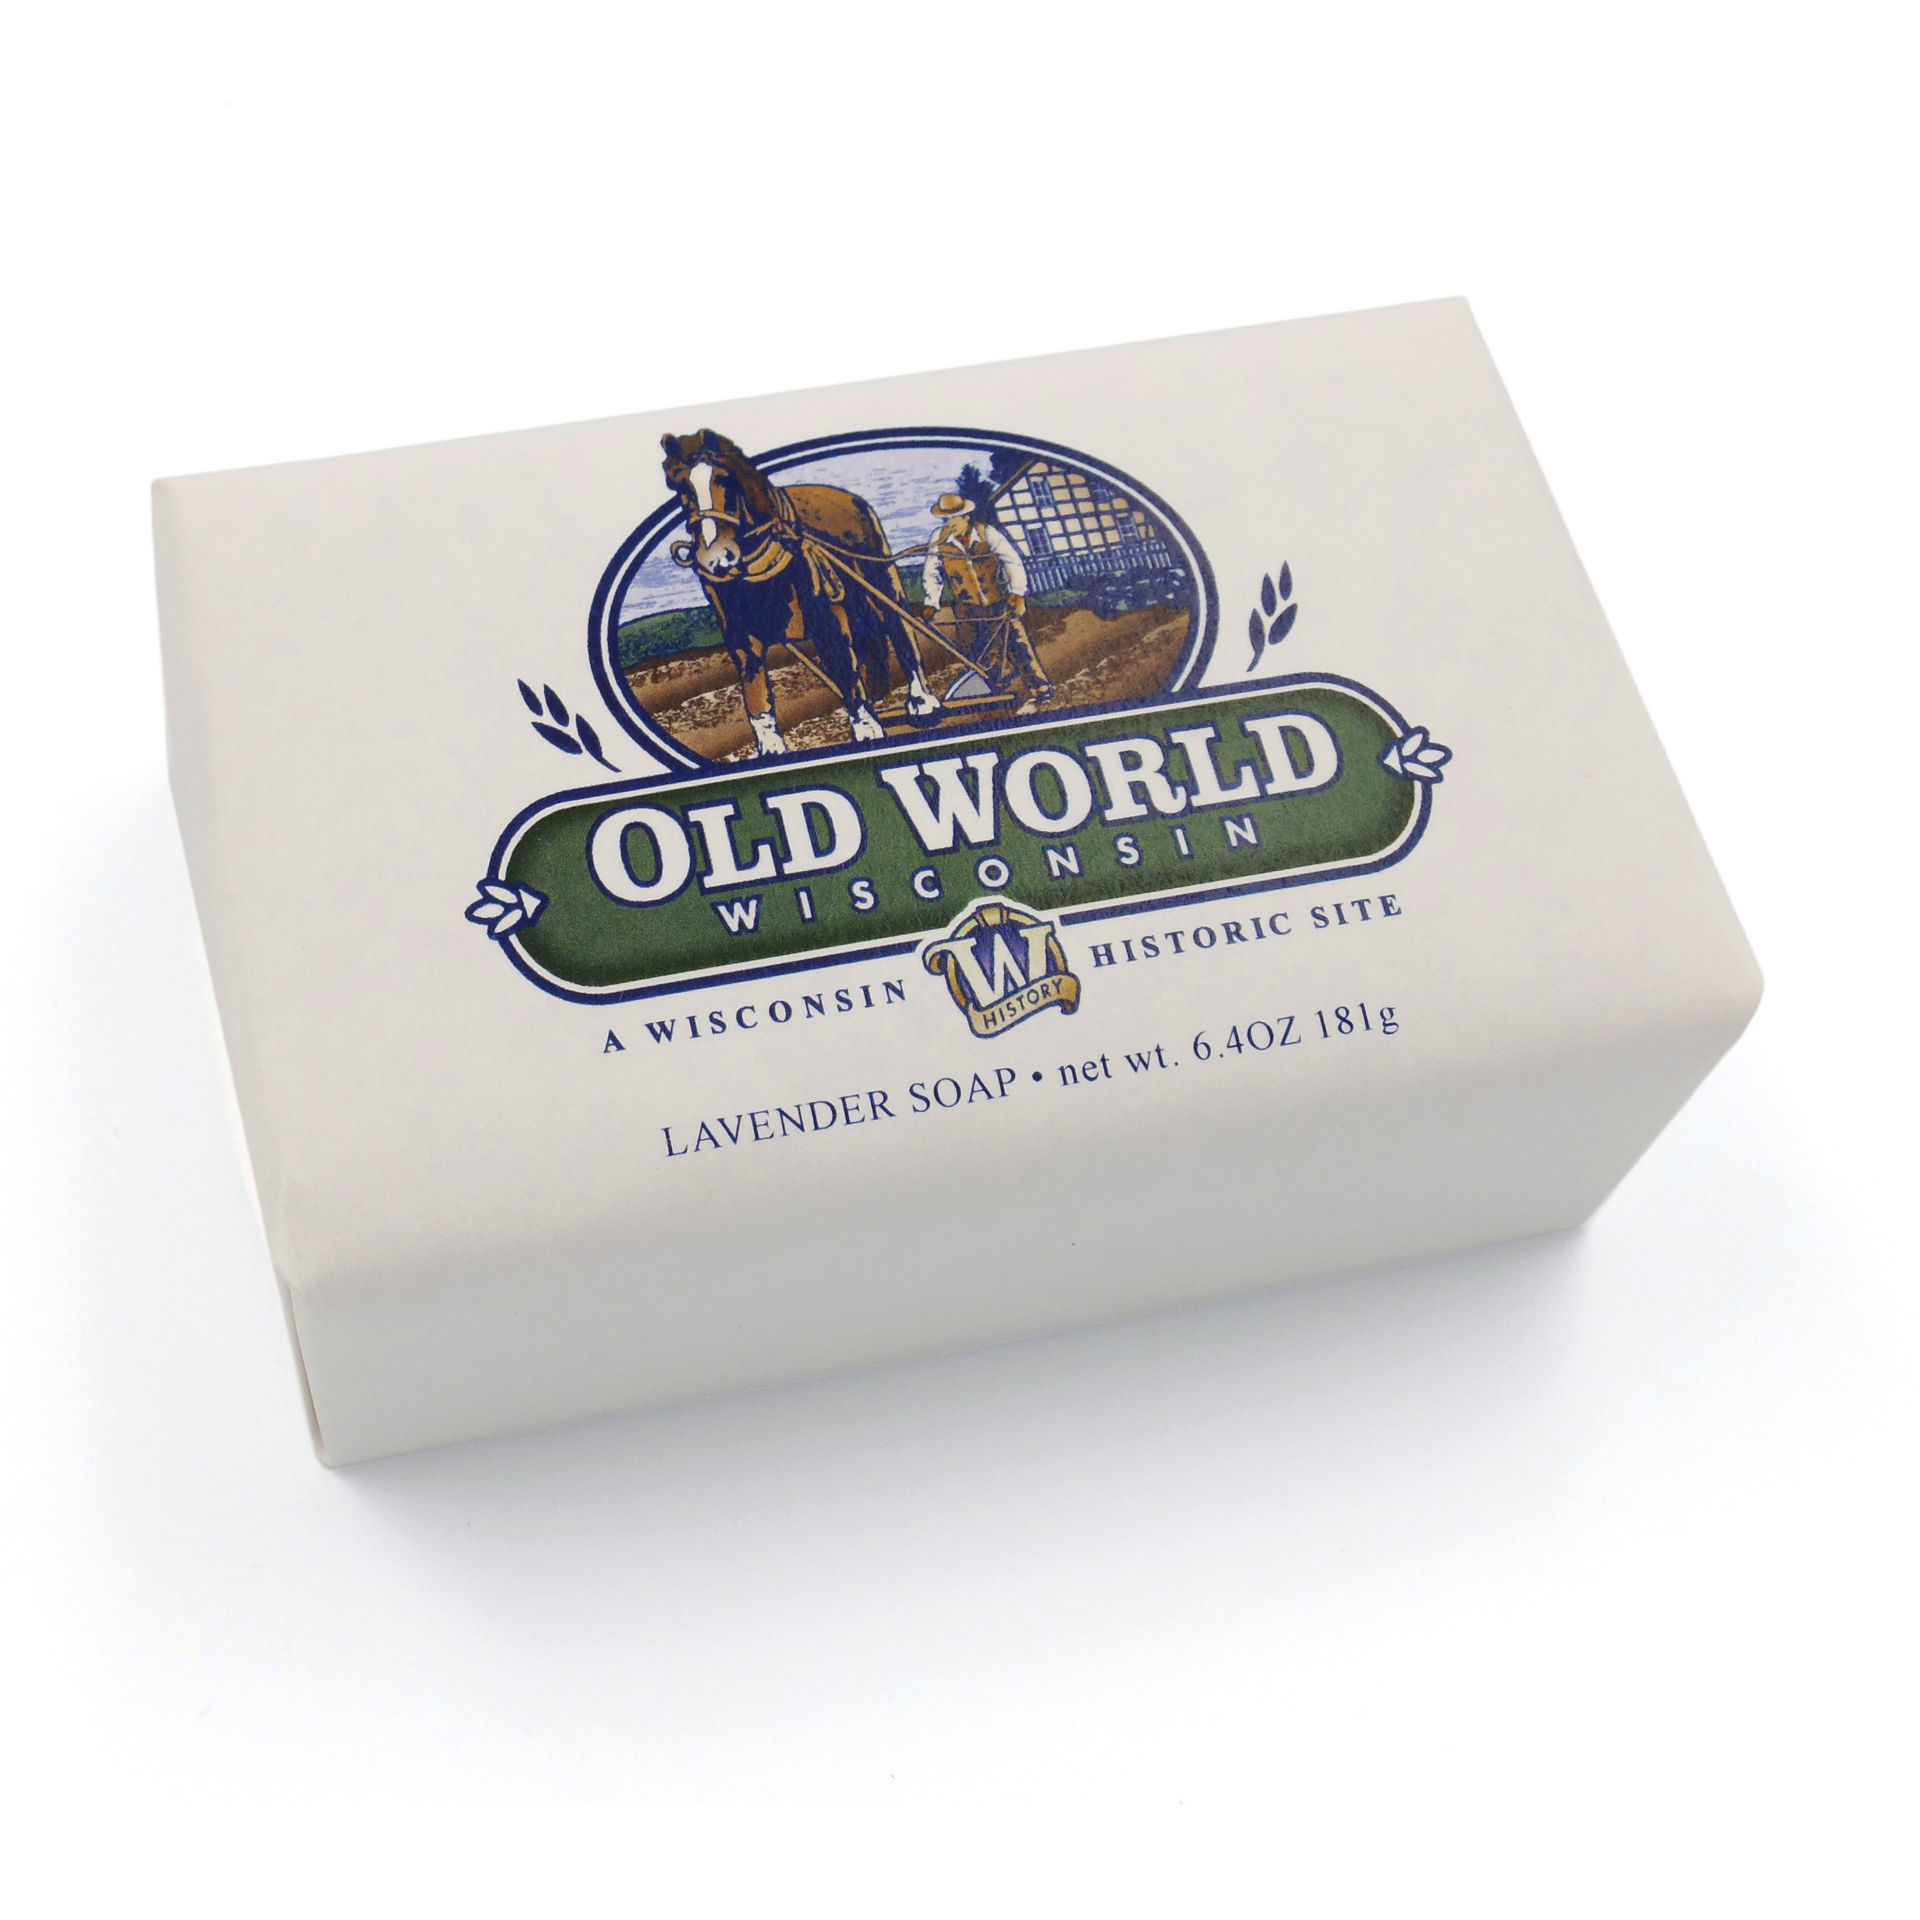 Bar Soap wrapped in a beige paper with the logo for Old World Wisconsin on it